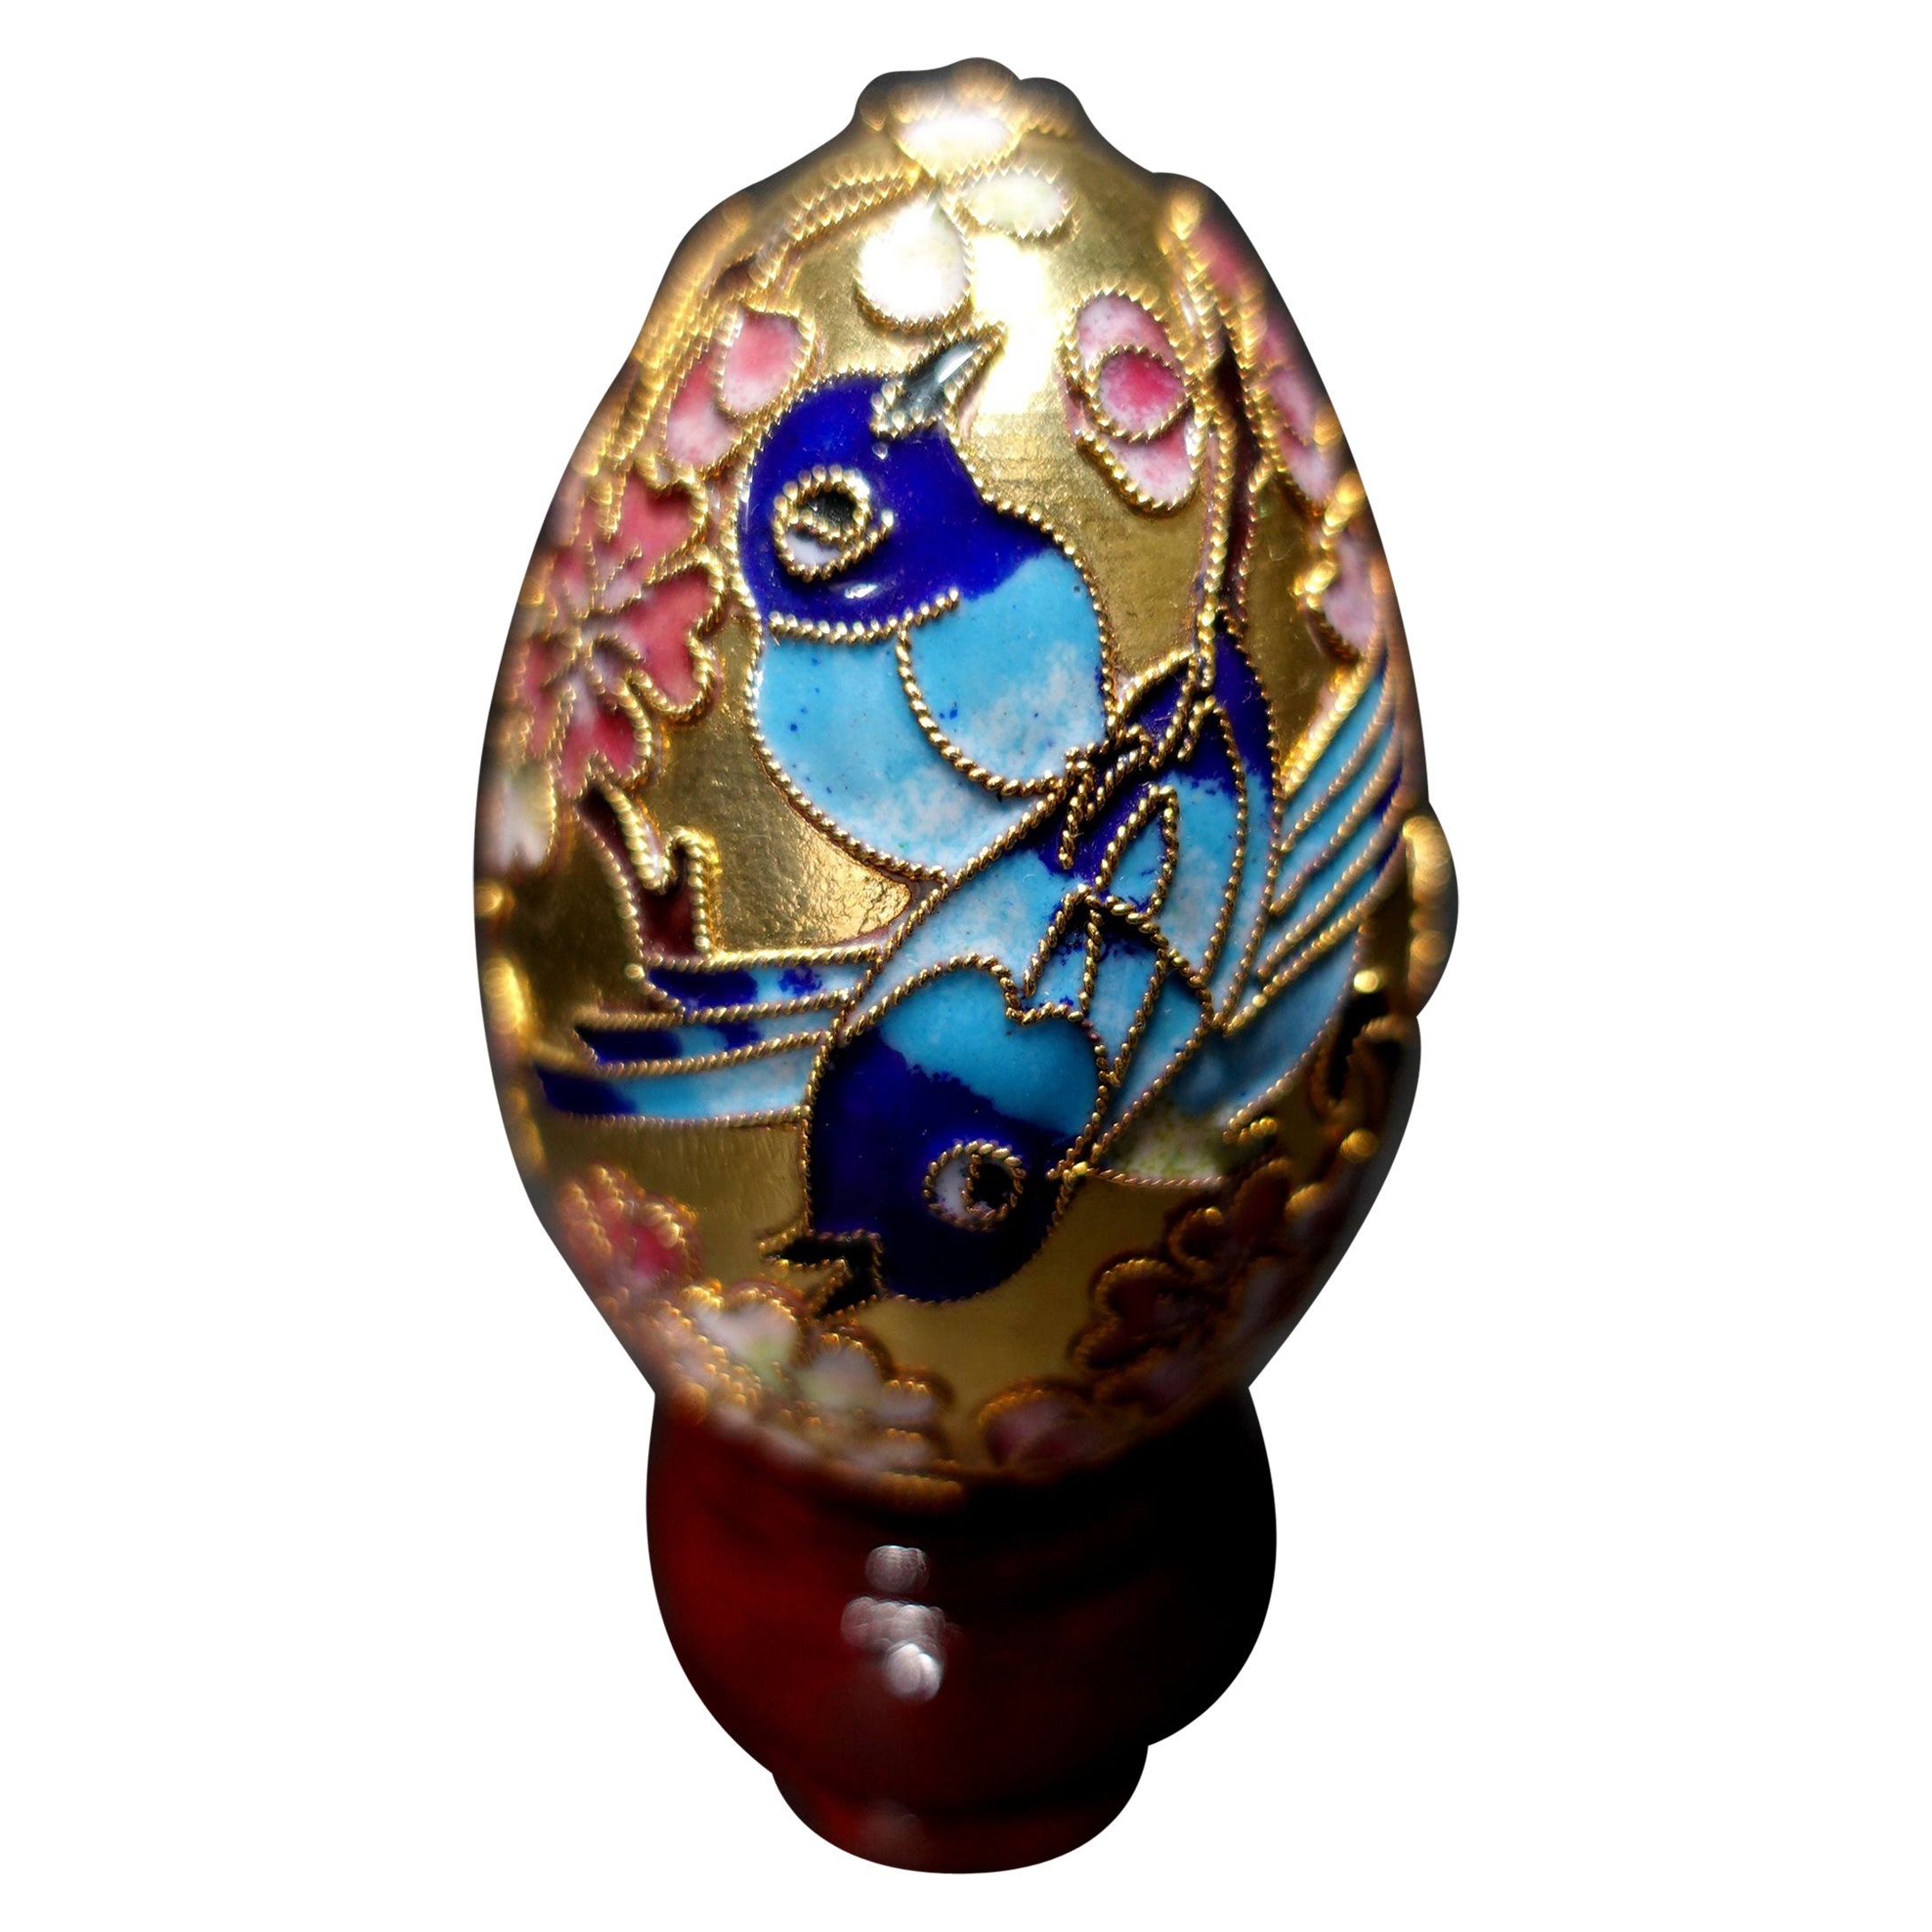 Chinese Cloisonné Enamel Egg "Blue Bords" with Wood Stand, Early 20th Century #1 For Sale